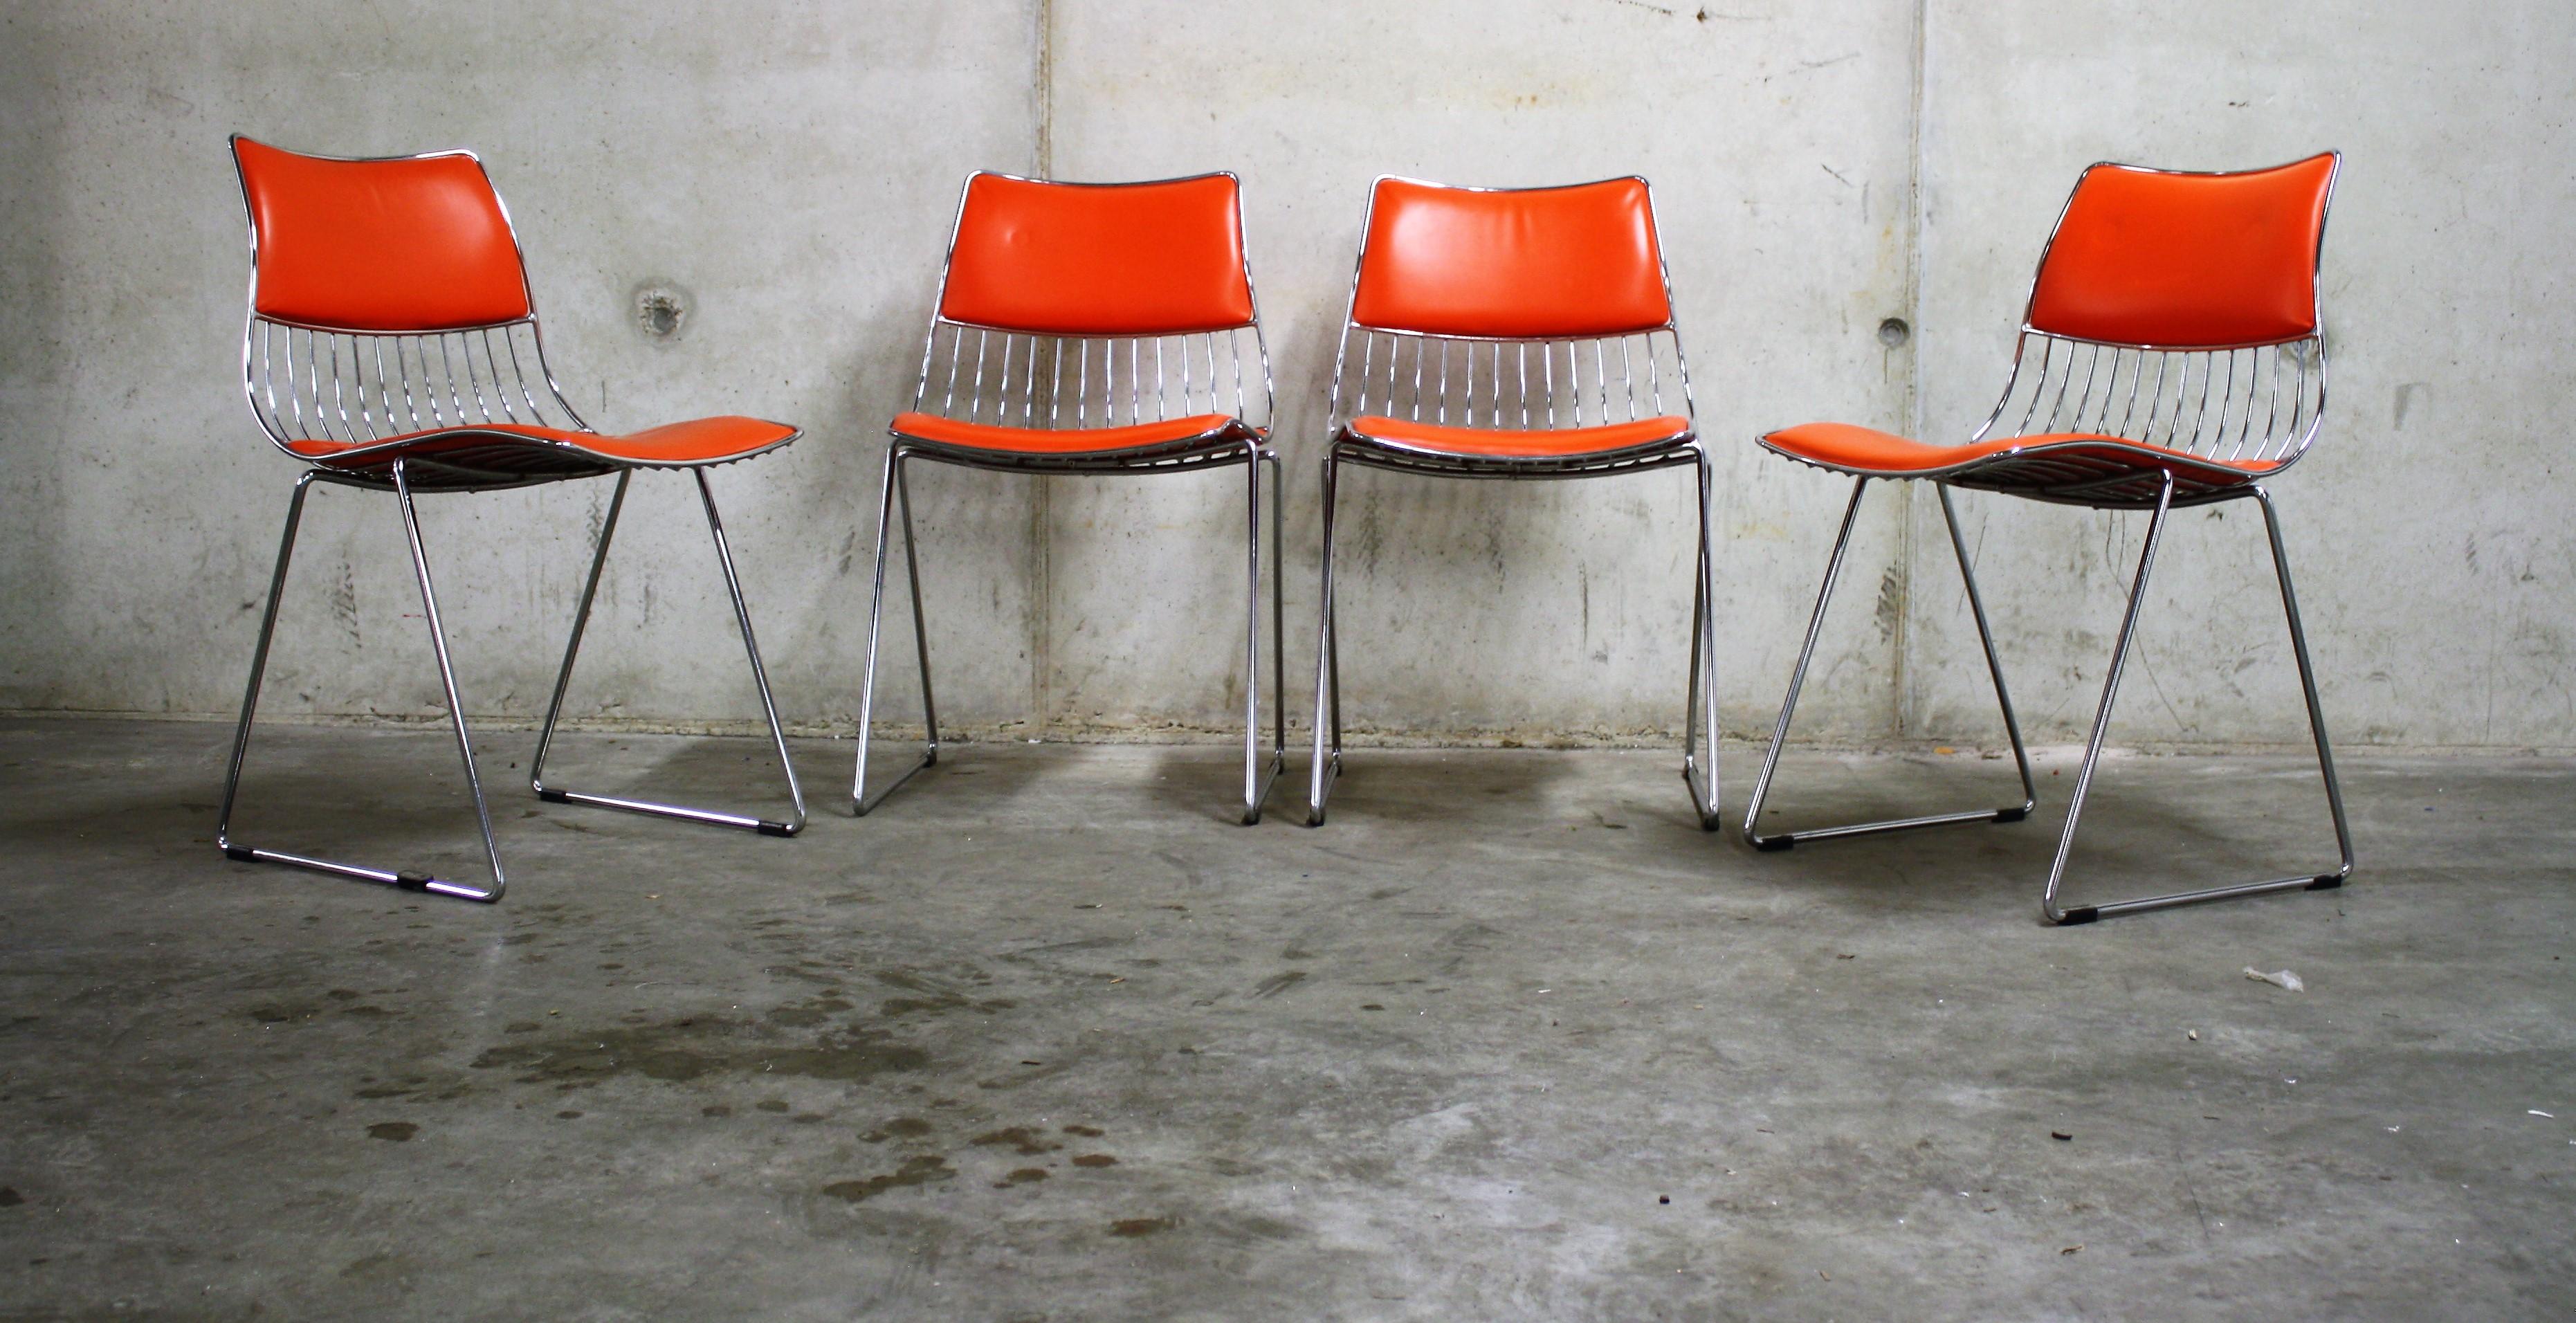 Set of four stackable dining chairs designed by Rudi Verelst.

The have a heavy wired chrome frame with orange skai upholstery.

The chairs are in a very good condition with no damages.

They sit well and have a strong design.

Belgium,